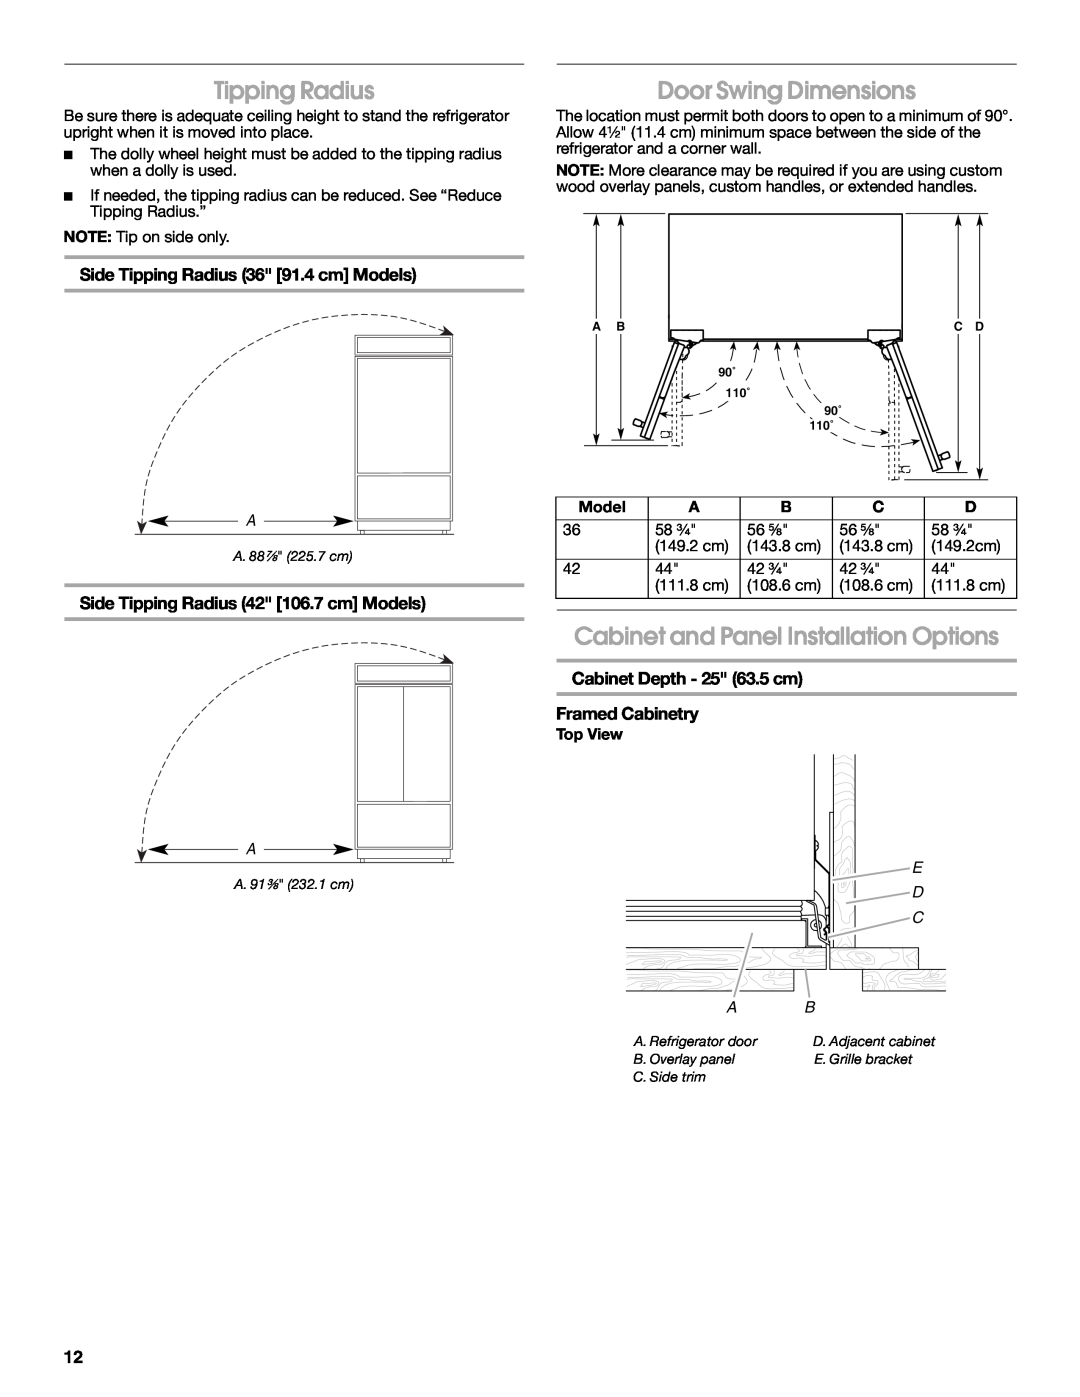 Jenn-Air W10379137A manual Tipping Radius, Door Swing Dimensions, Cabinet and Panel Installation Options 